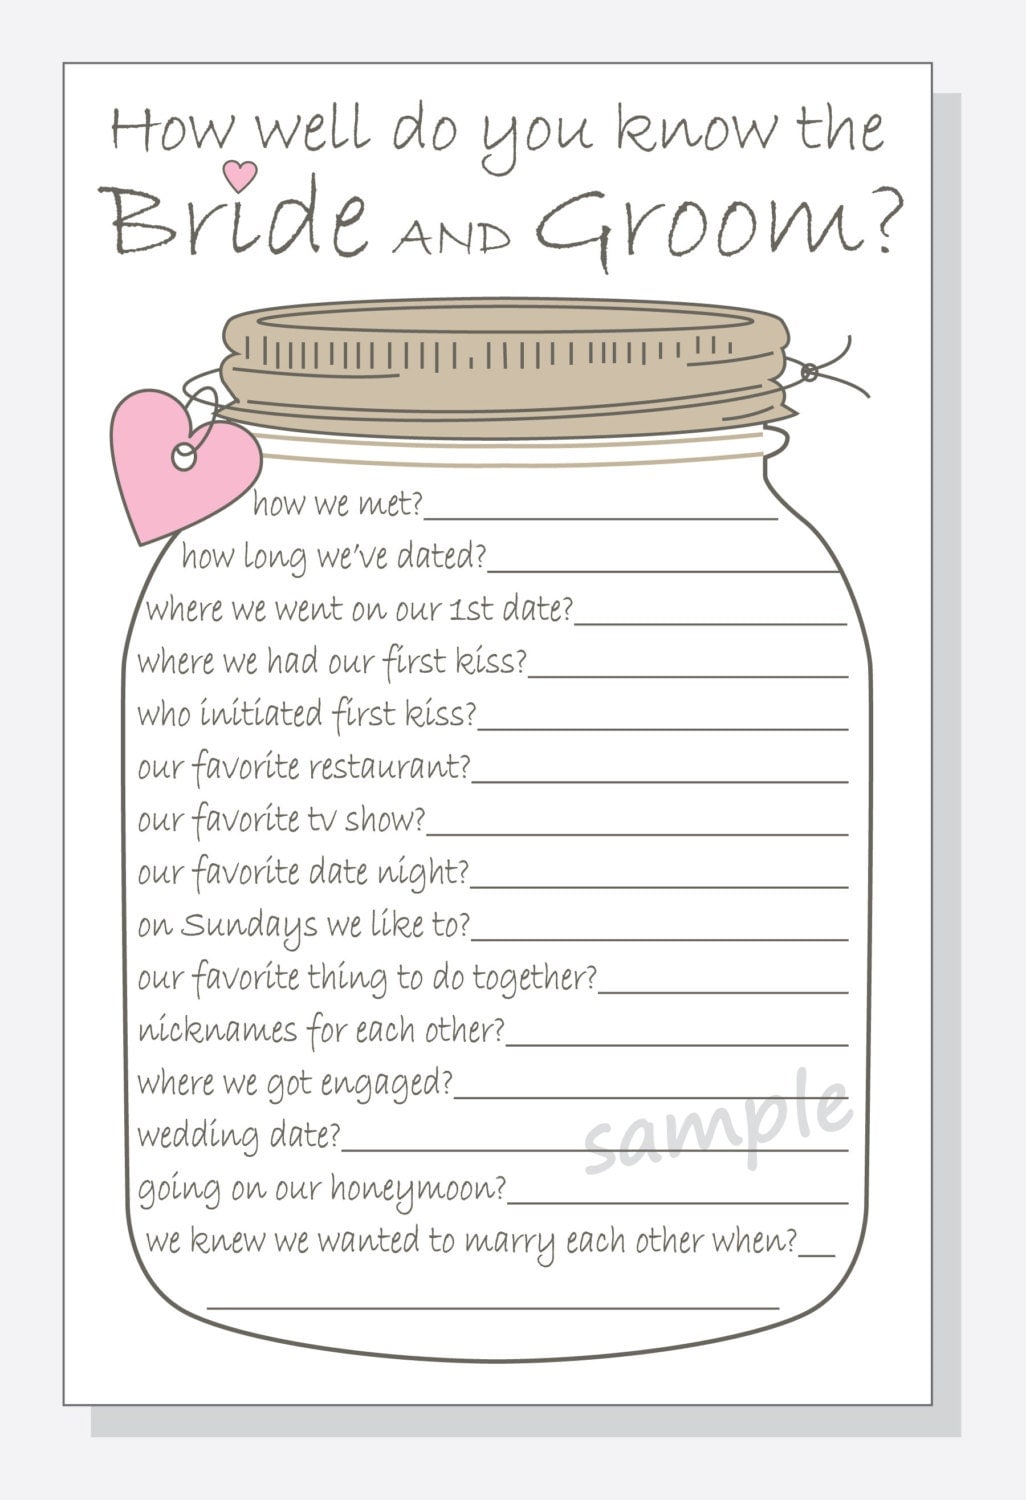 printable-how-well-do-you-know-the-bride